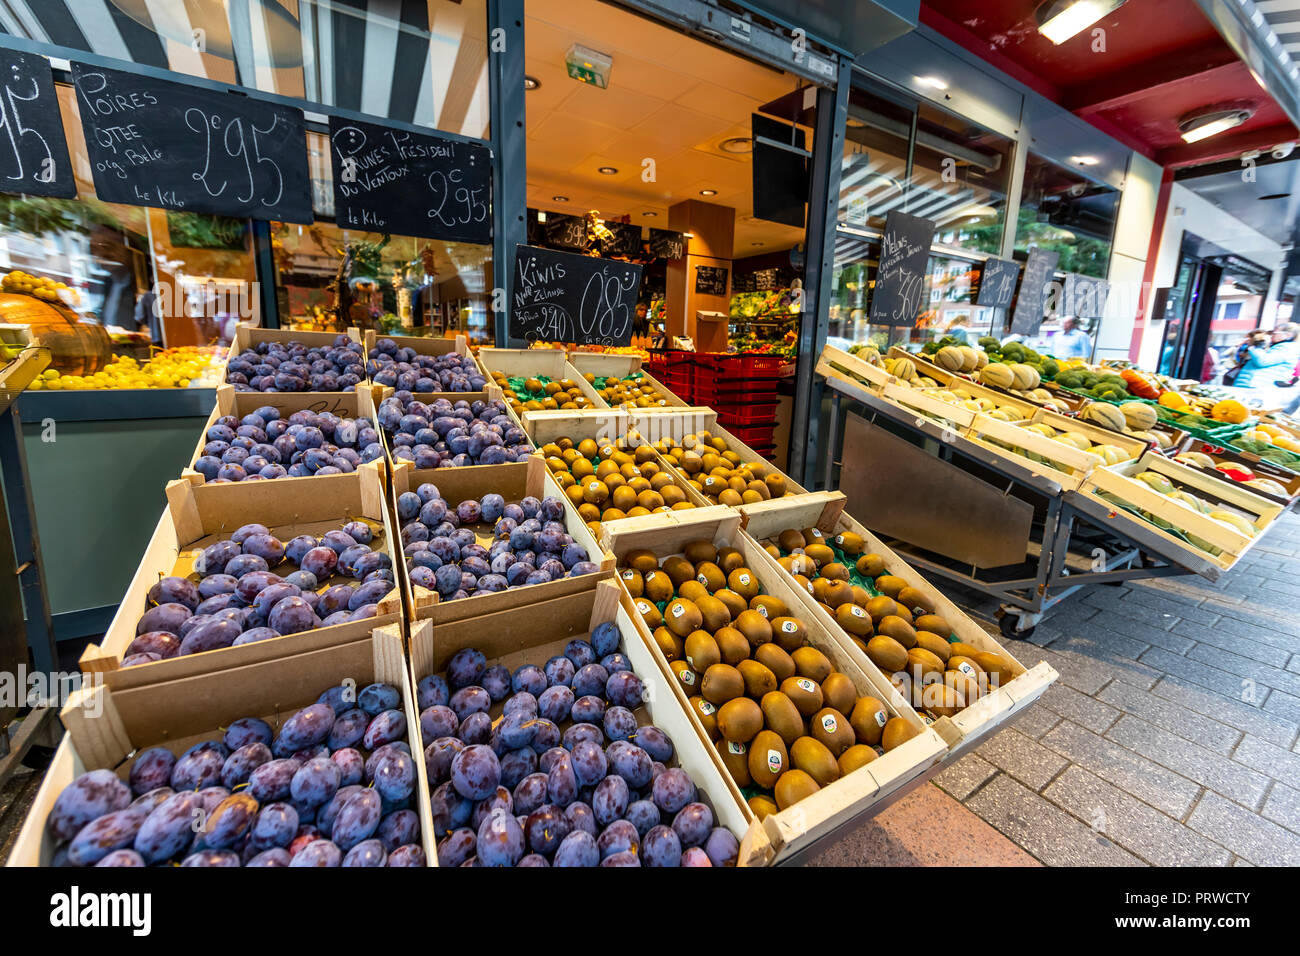 https://c8.alamy.com/comp/PRWCTY/greengrocers-shop-dunkirk-france-PRWCTY.jpg